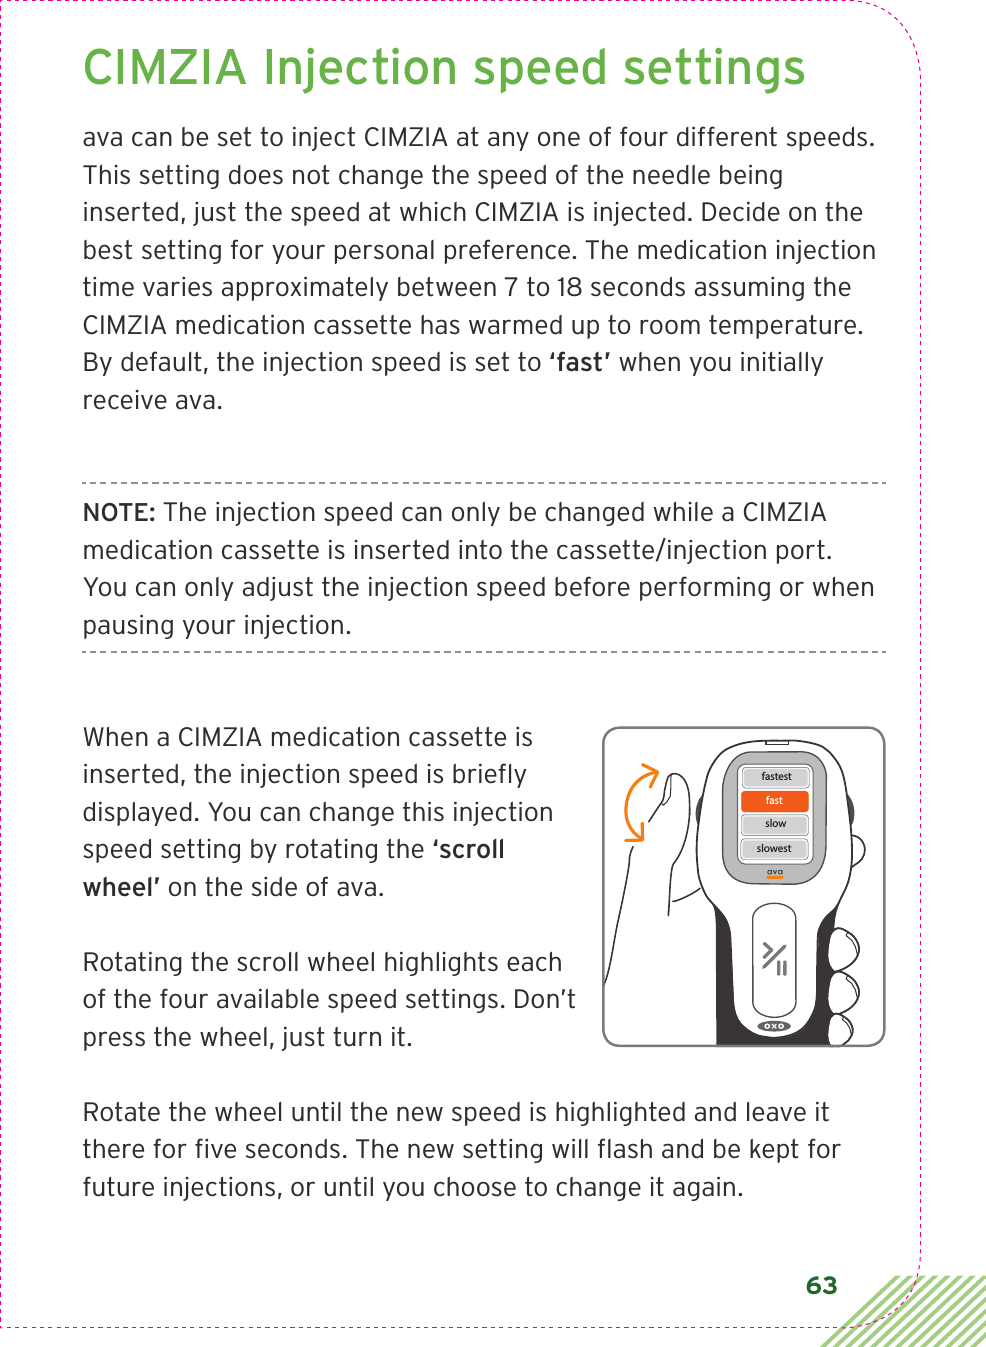 63CIMZIA Injection speed settingsava can be set to inject CIMZIA at any one of four different speeds. This setting does not change the speed of the needle being inserted, just the speed at which CIMZIA is injected. Decide on the best setting for your personal preference. The medication injection time varies approximately between 7 to 18 seconds assuming the CIMZIA medication cassette has warmed up to room temperature. By default, the injection speed is set to ‘fast’ when you initially receive ava.NOTE: The injection speed can only be changed while a CIMZIA medication cassette is inserted into the cassette/injection port. You can only adjust the injection speed before performing or when pausing your injection.When a CIMZIA medication cassette is inserted, the injection speed is brieﬂy displayed. You can change this injection speed setting by rotating the ‘scroll wheel’ on the side of ava.Rotating the scroll wheel highlights each of the four available speed settings. Don’t press the wheel, just turn it.Rotate the wheel until the new speed is highlighted and leave it there for ﬁve seconds. The new setting will ﬂash and be kept for future injections, or until you choose to change it again.fastfastestslowslowest